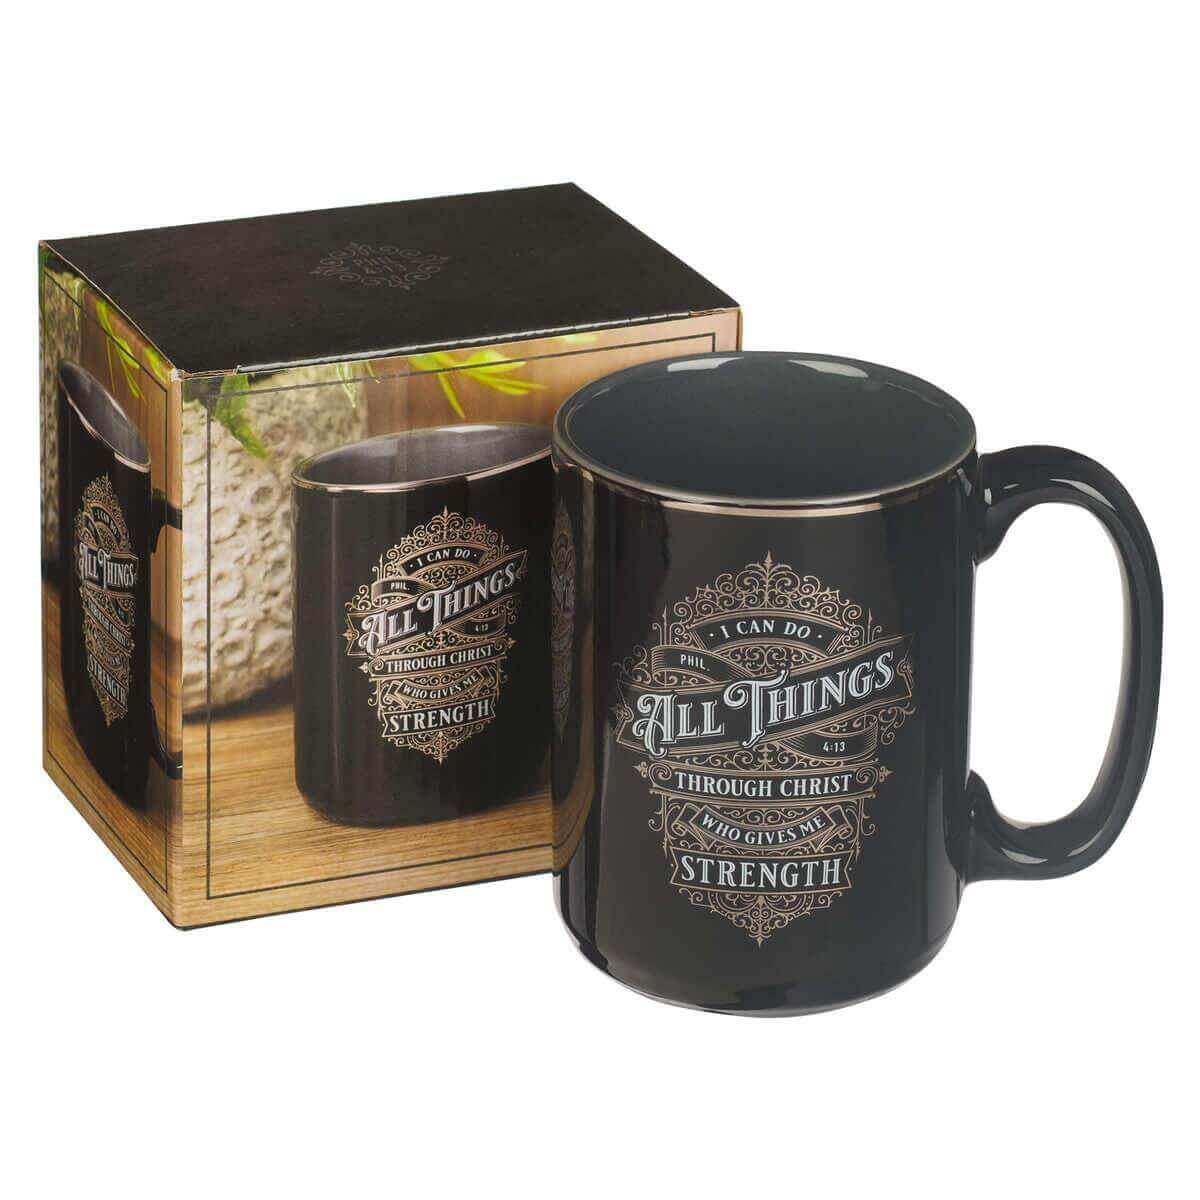 All Things Black and Silver Ceramic Coffee Mug - Philippians 4:13 | 2FruitBearers